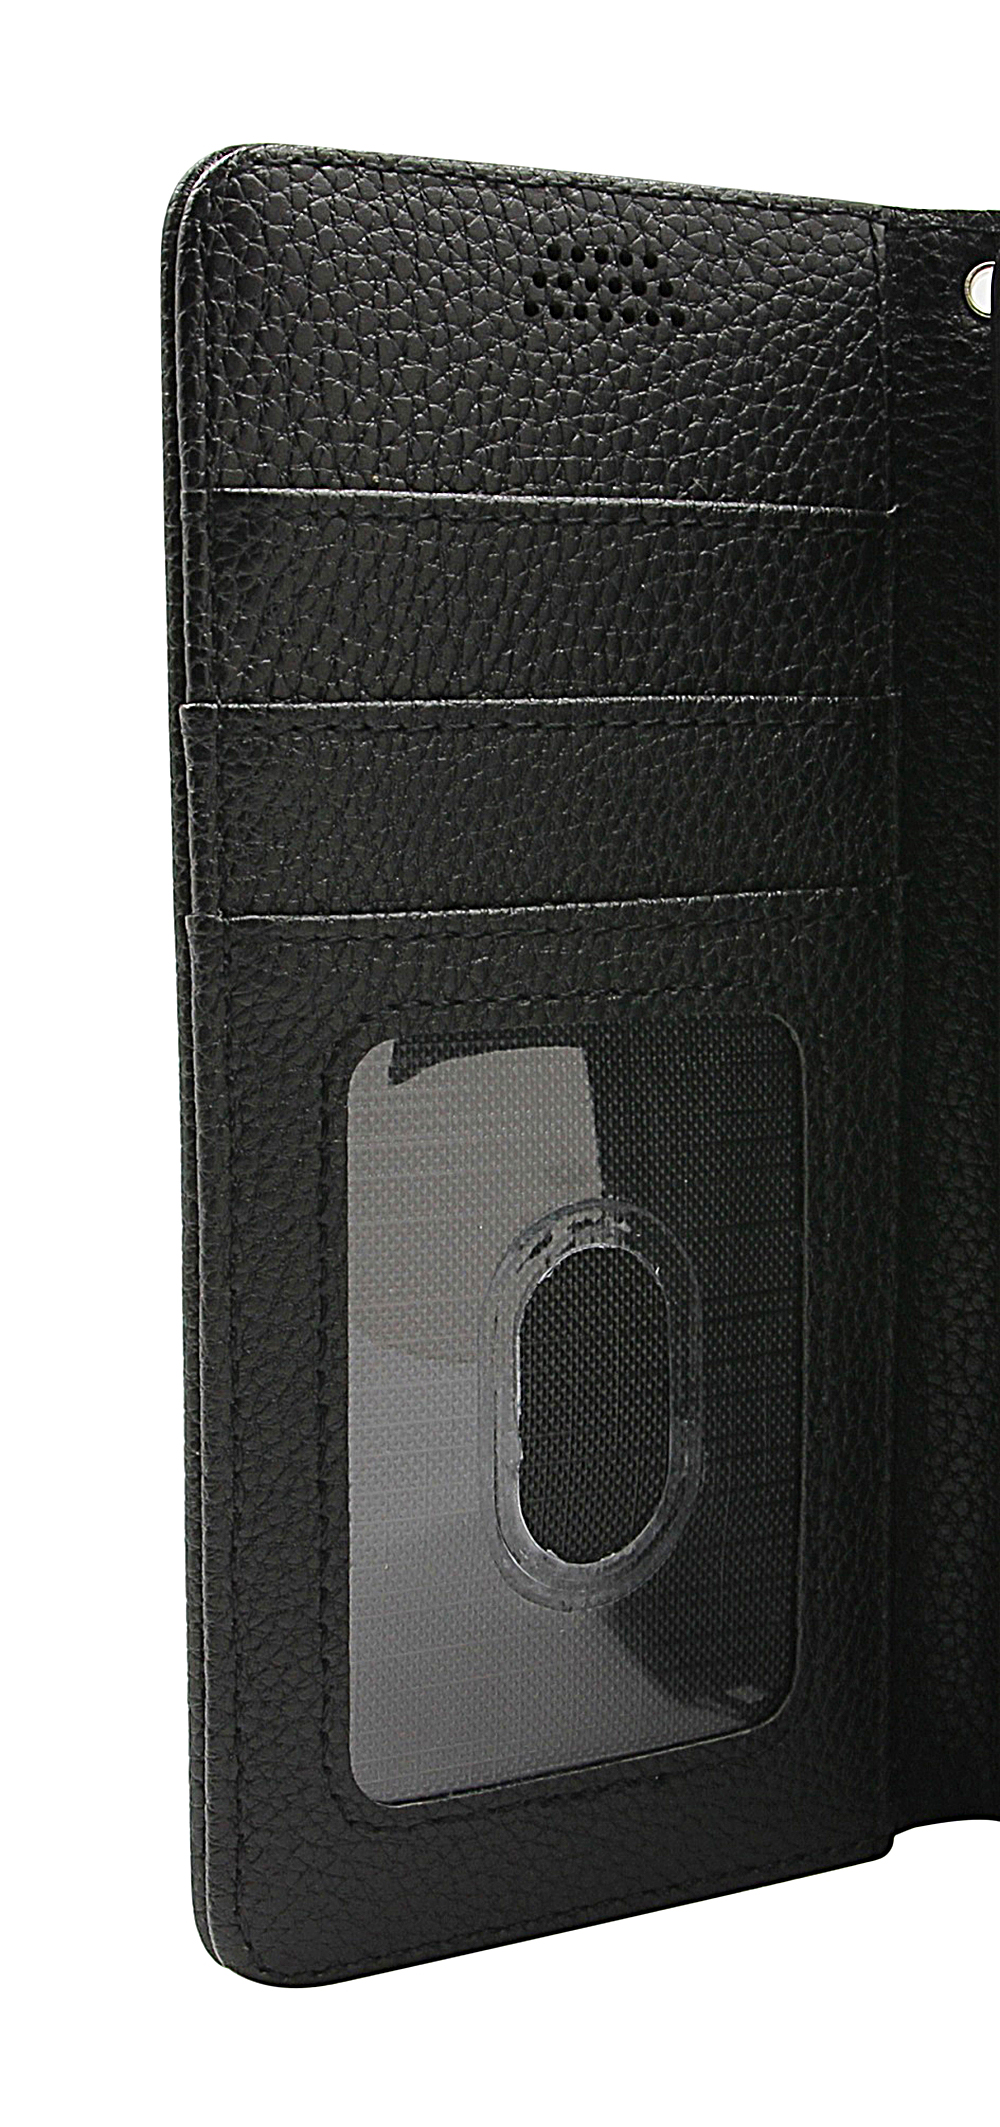 New Standcase Wallet iPhone 13 Pro Max (6.7)